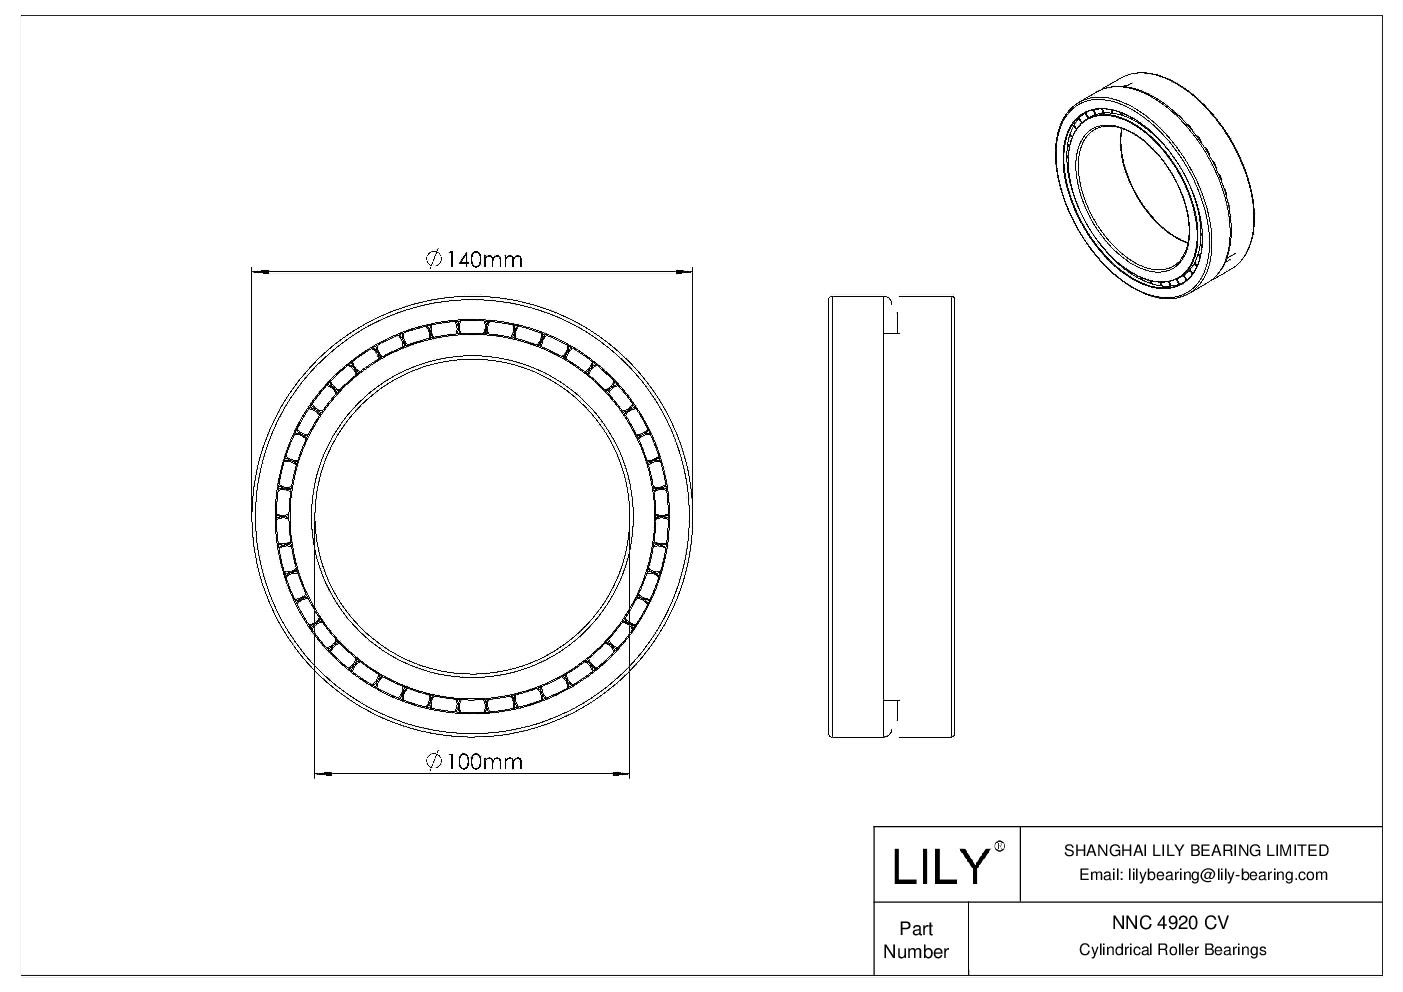 NNC 4920 CV Double Row Full Complement Cylindrical Roller Bearings cad drawing